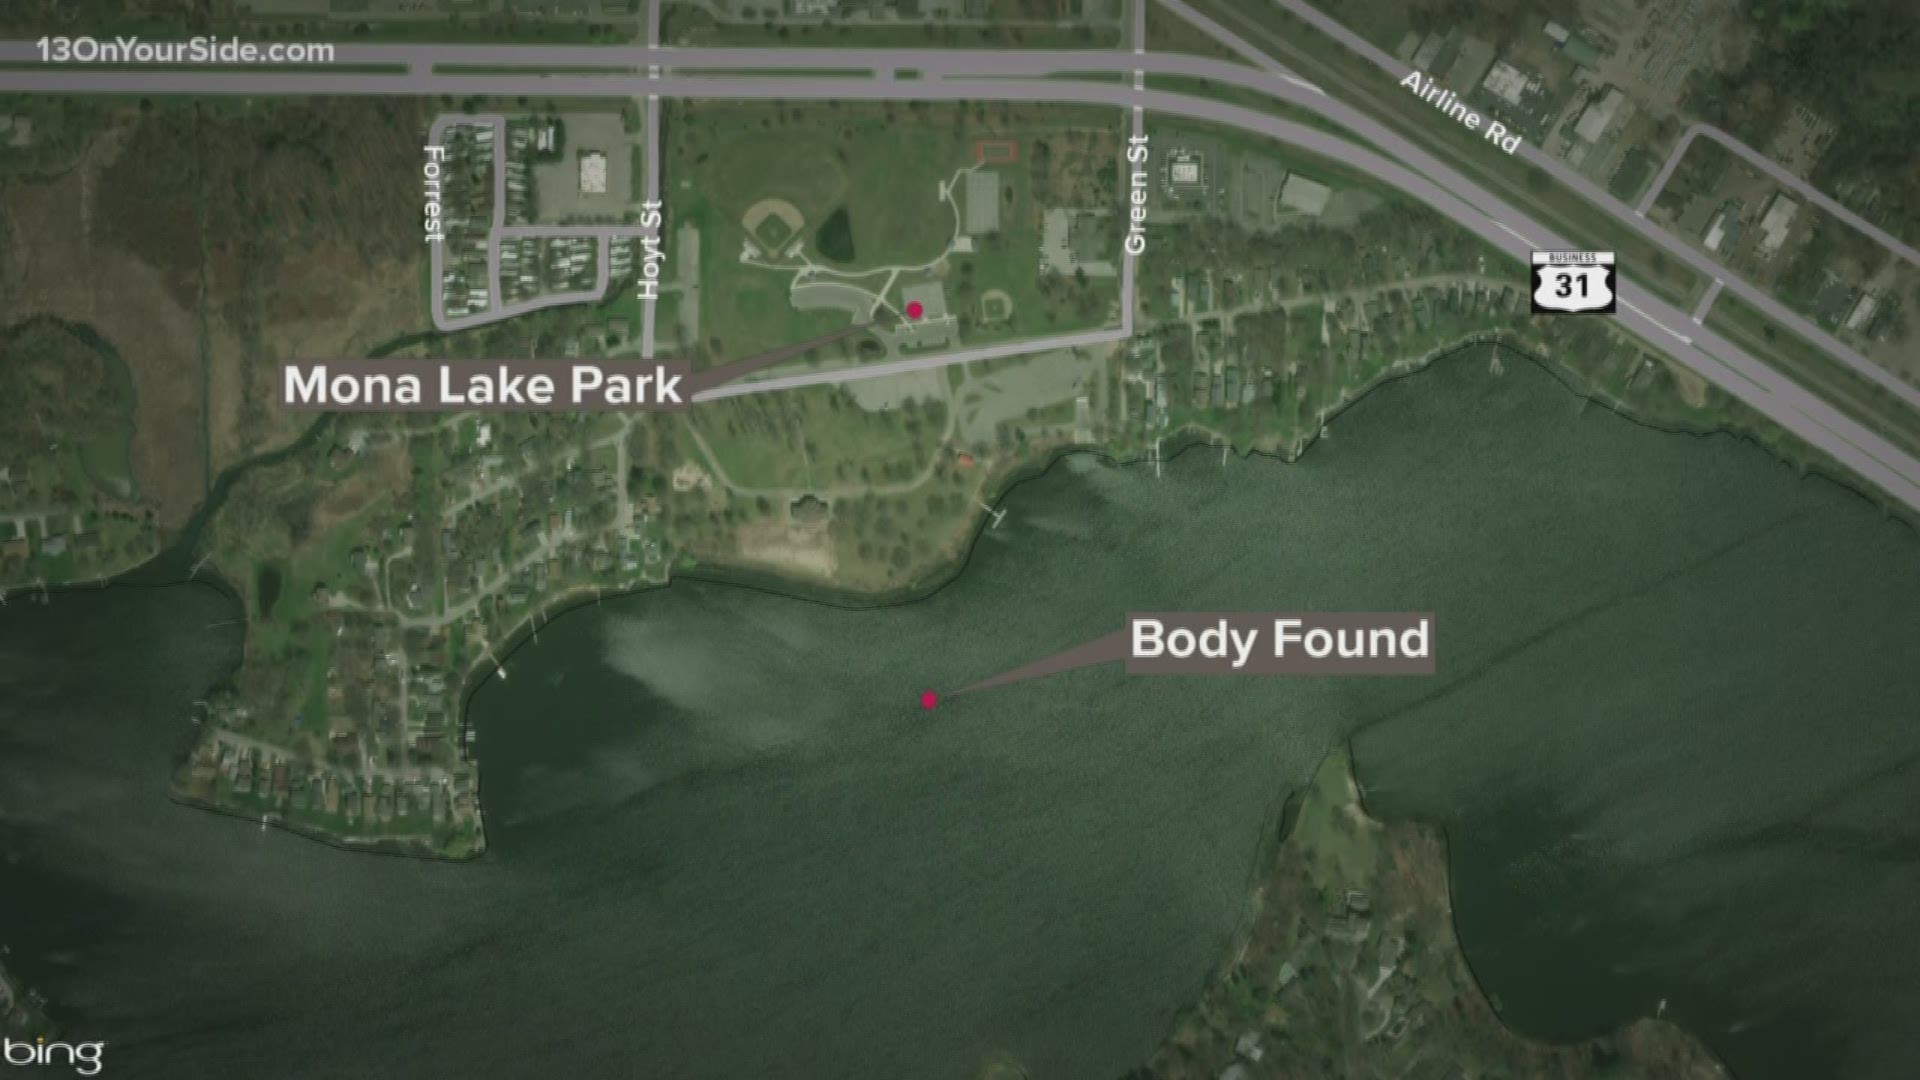 Muskegon Heights Police identified the man found in the water at Mona Lake Park as 71-year-old James Alan Hiza.